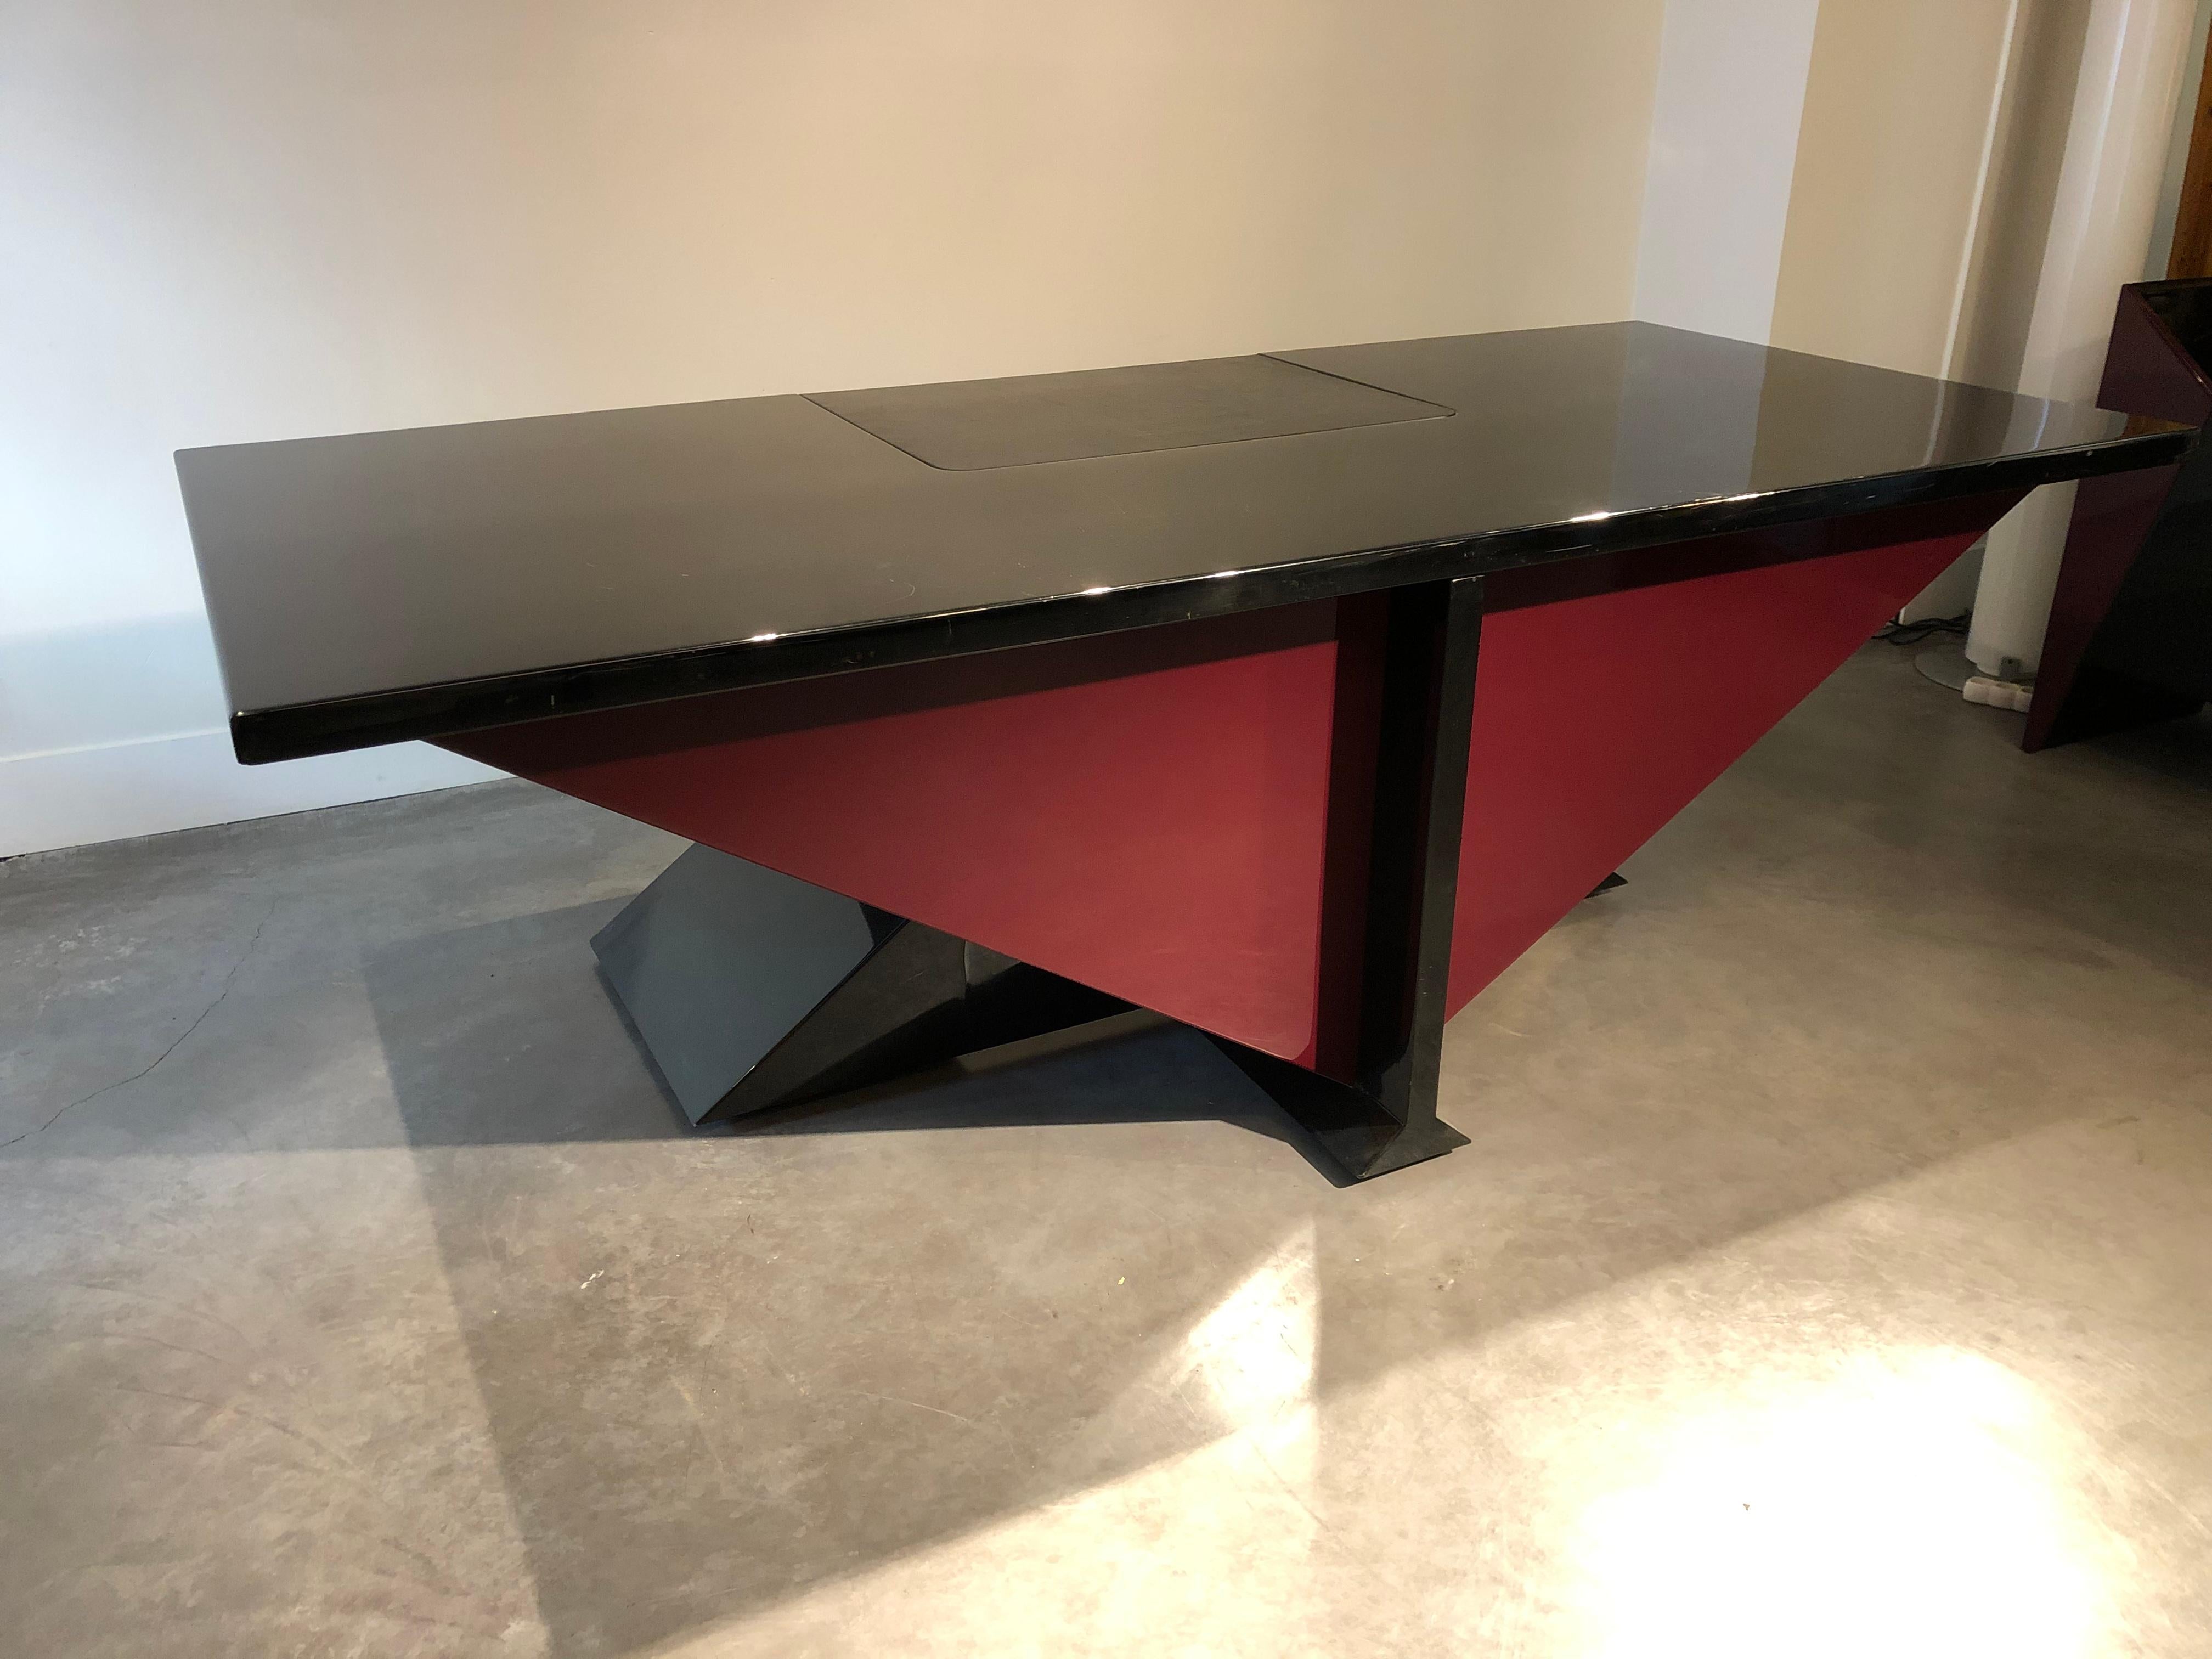 One off a kind desk designed by famous couturier pierre Cardin at the end of the seventies.
This desk is well known and published in a lot of books and a version a little bit different was used by pierre Cardin himself in his bureau in the Espace